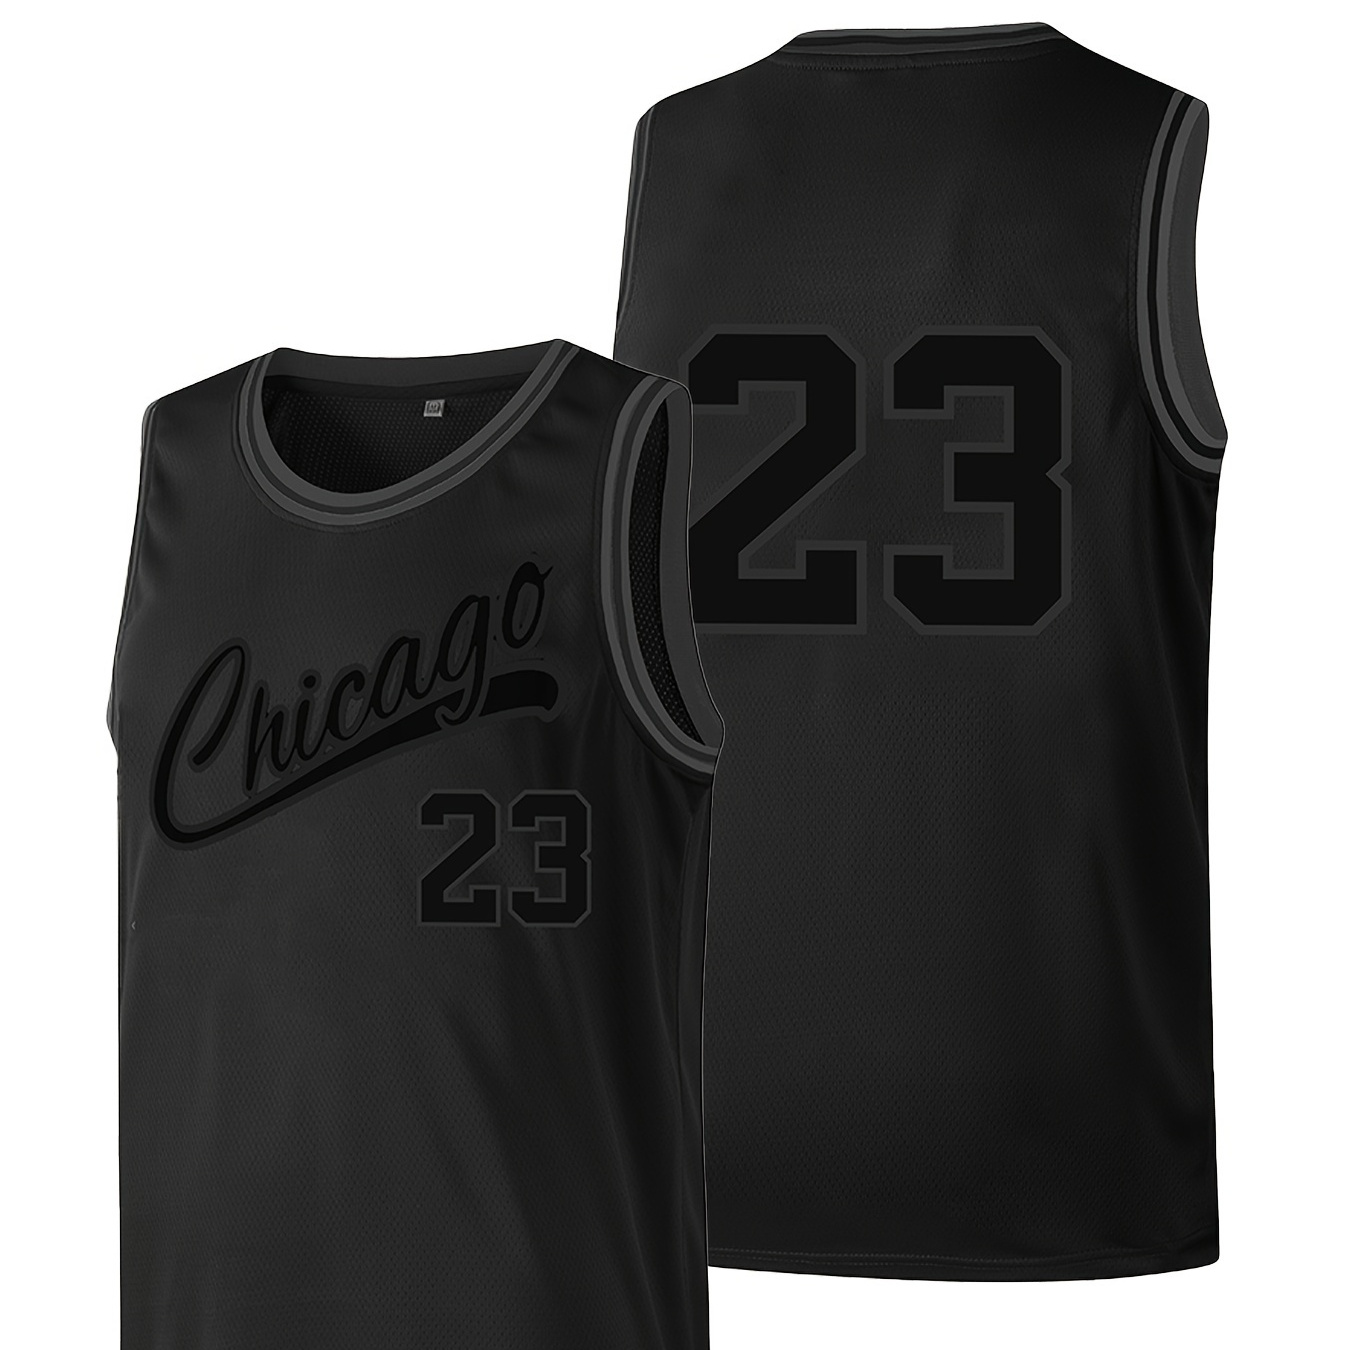 

Men's Basketball Jersey, # 23 Vintage Street Embroidery Sleeveless Moisture Wicking Breathable Tank Top For Training Competition